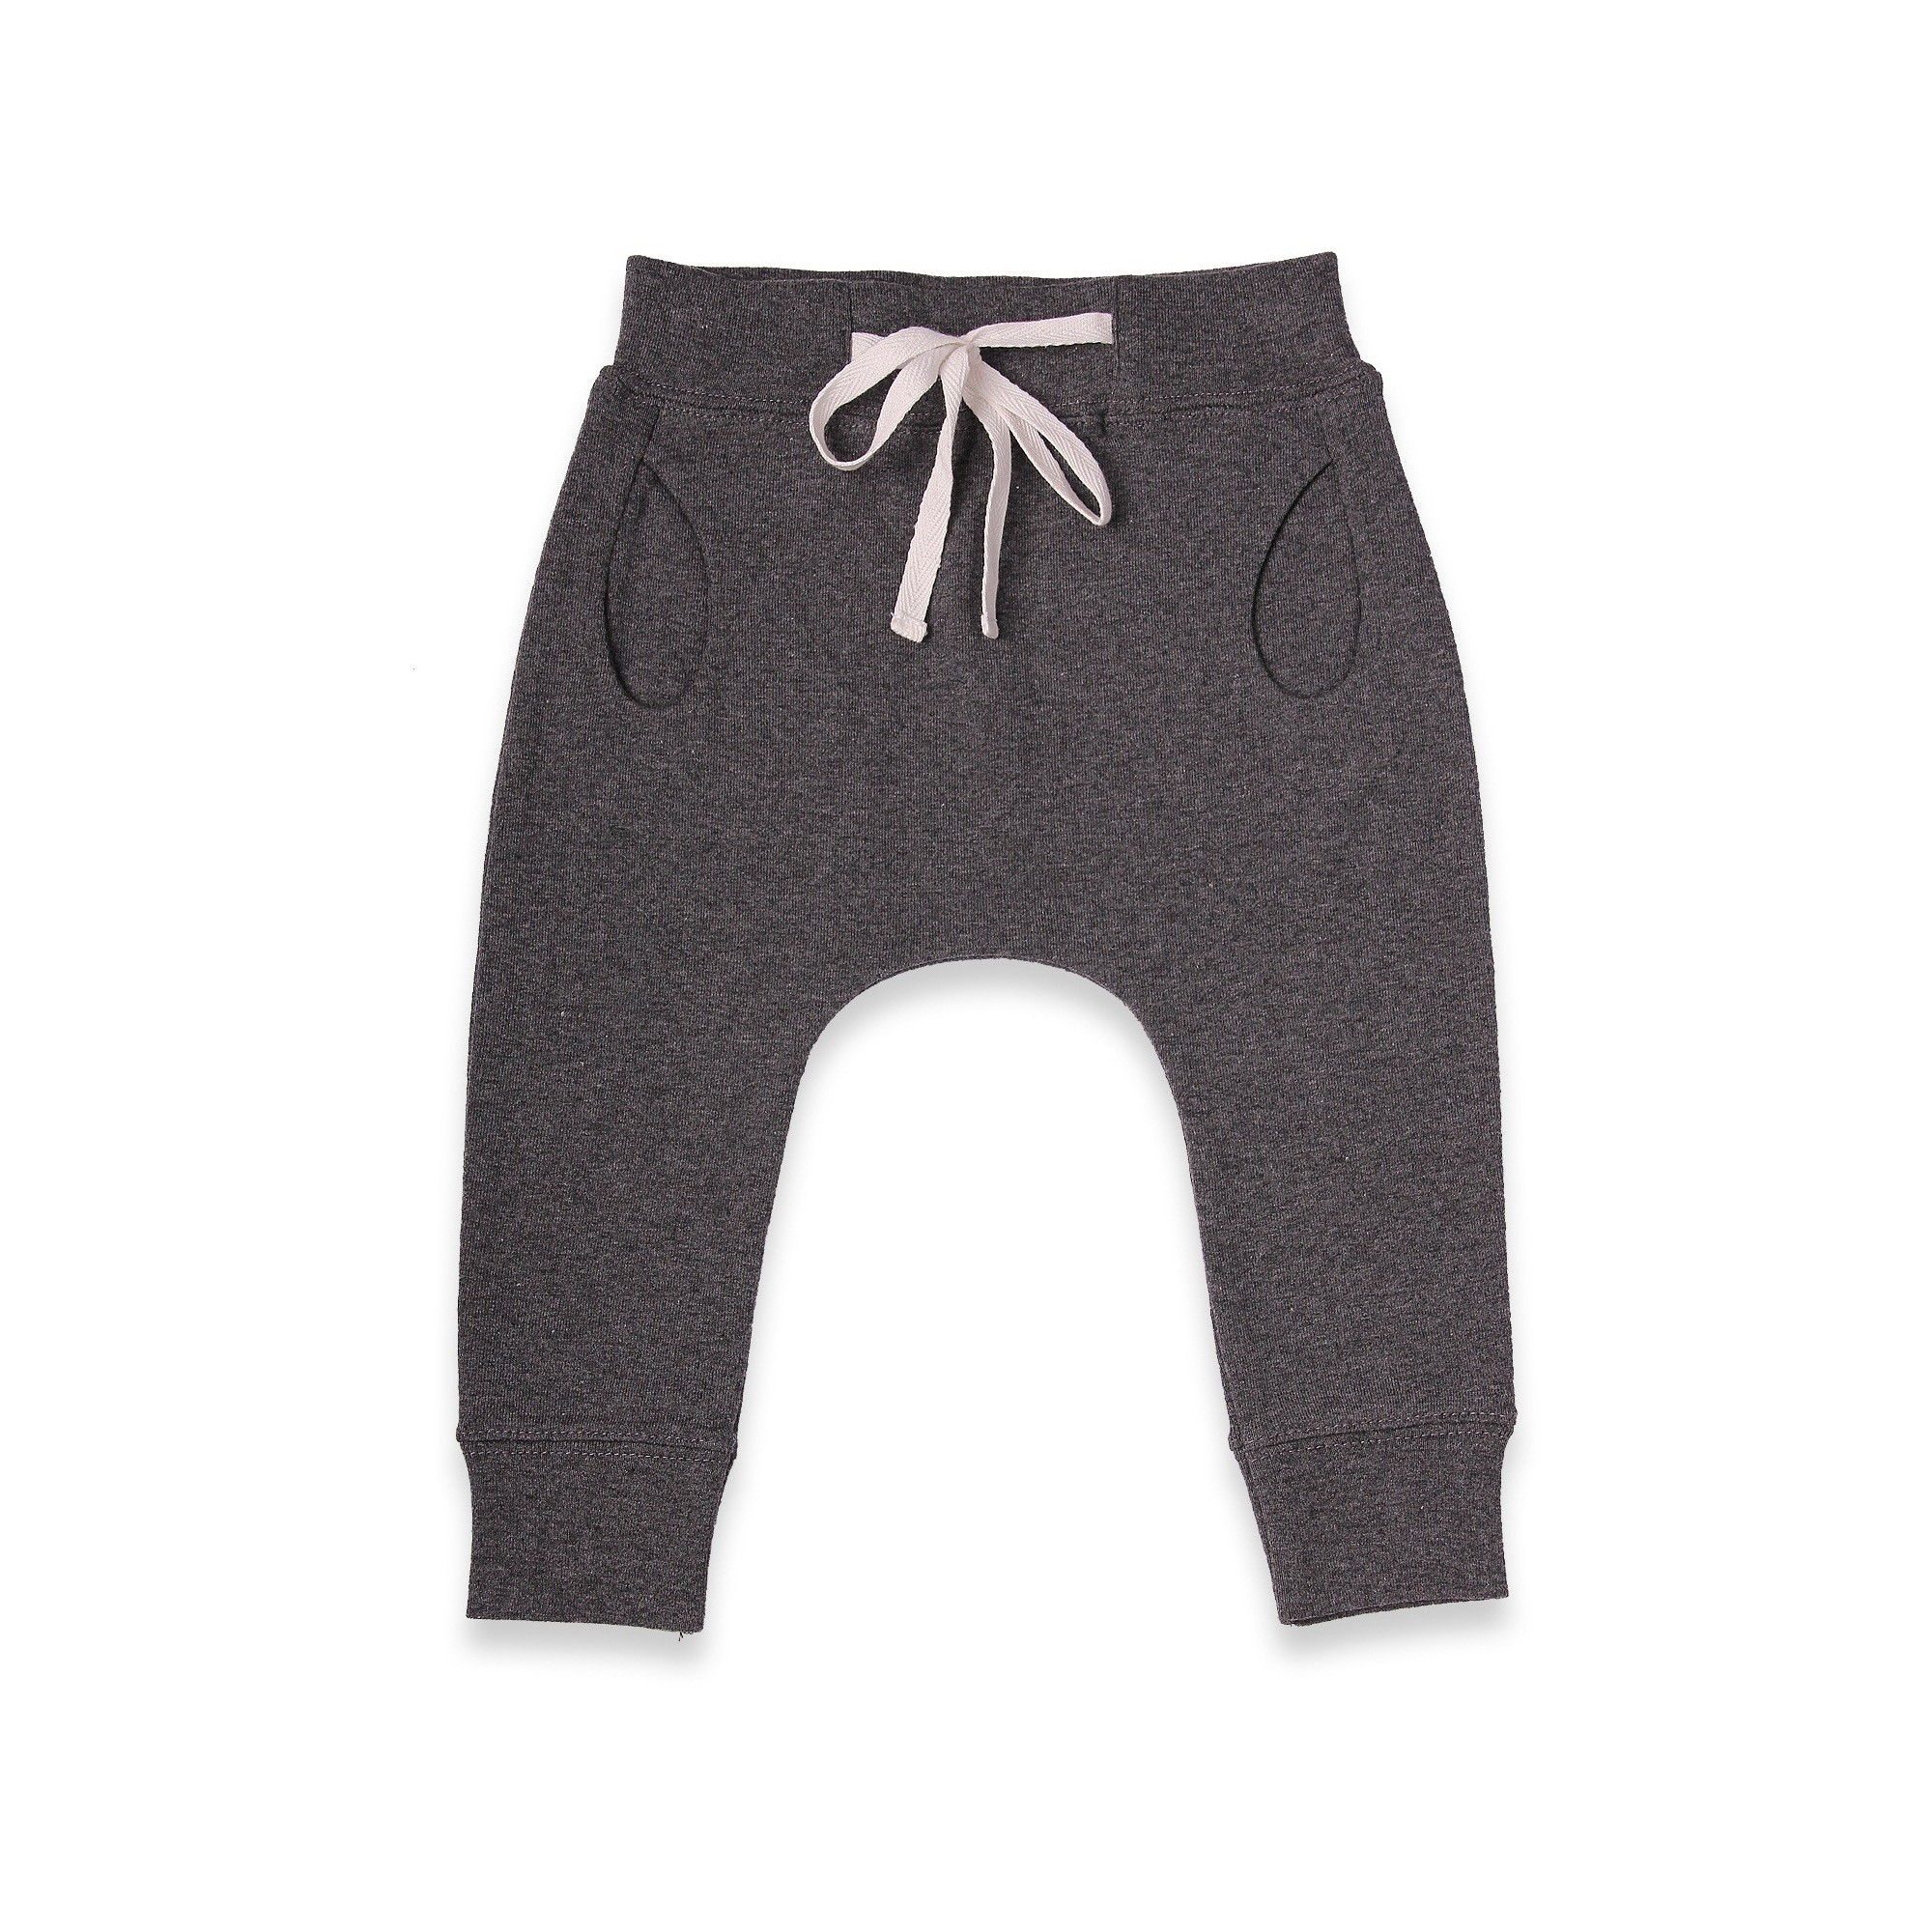 Cotton collection - Anthracite grey baby toddler jogging like sarouel ...